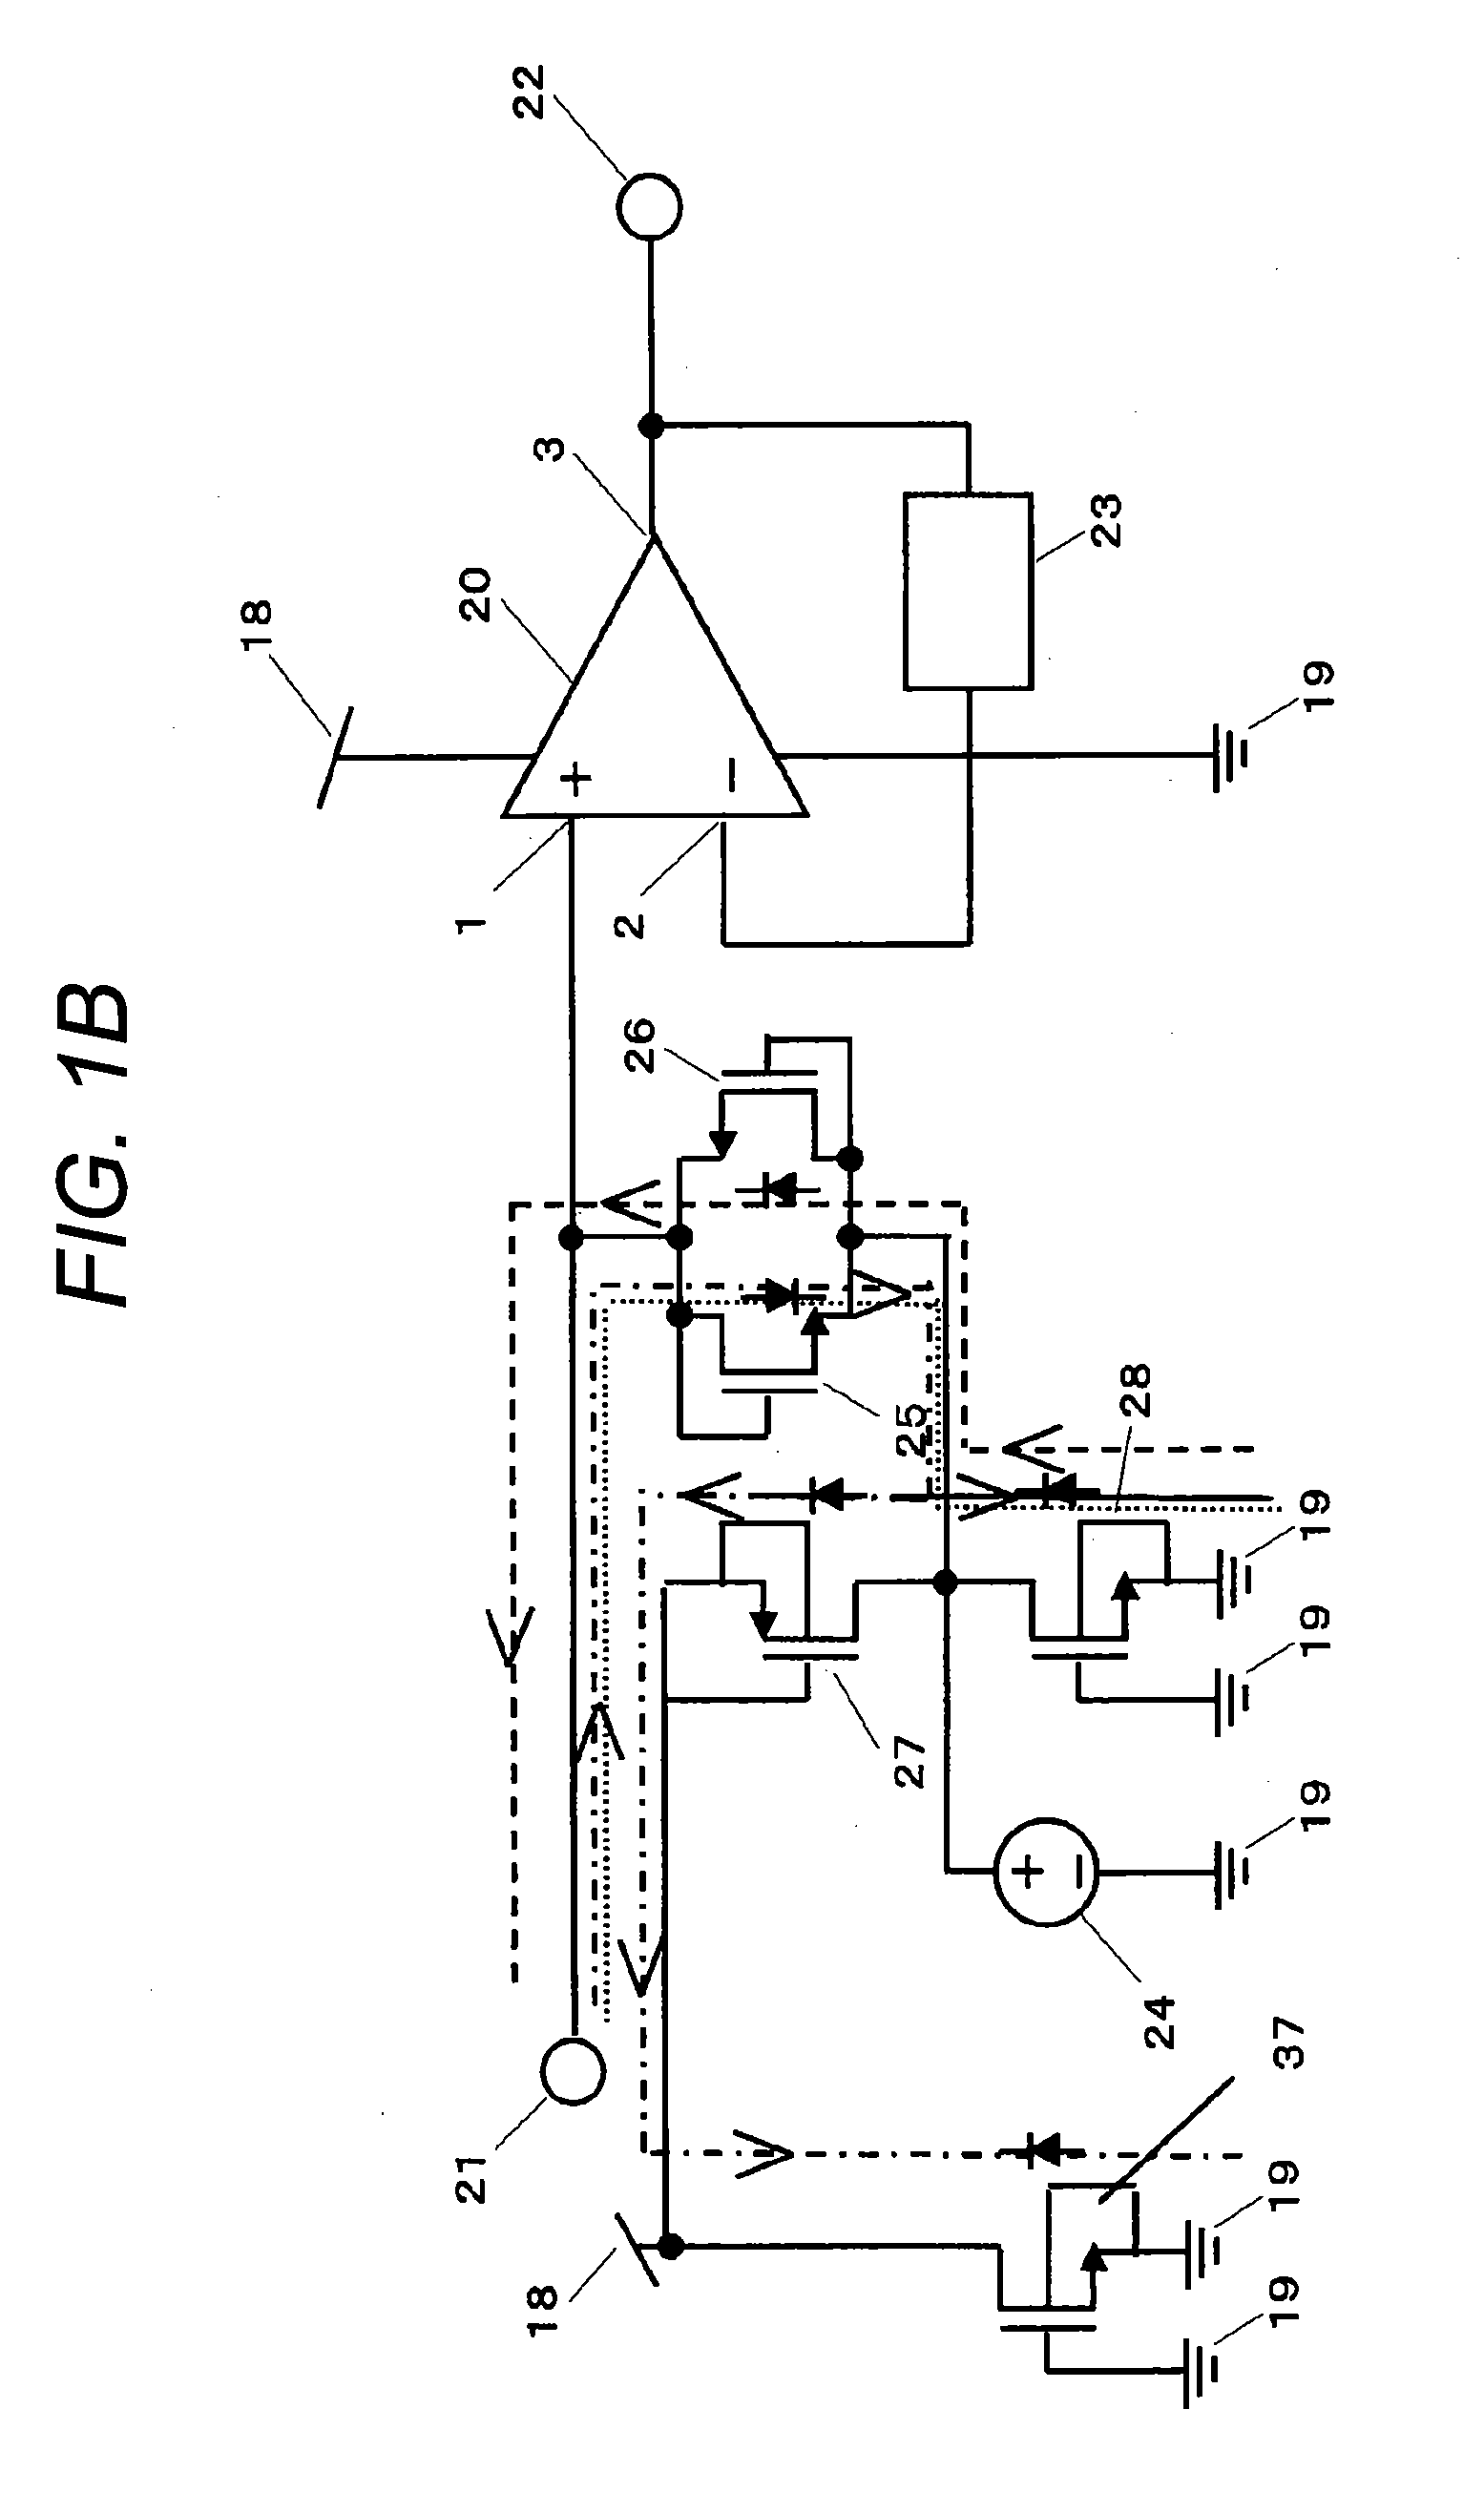 Amplifying device